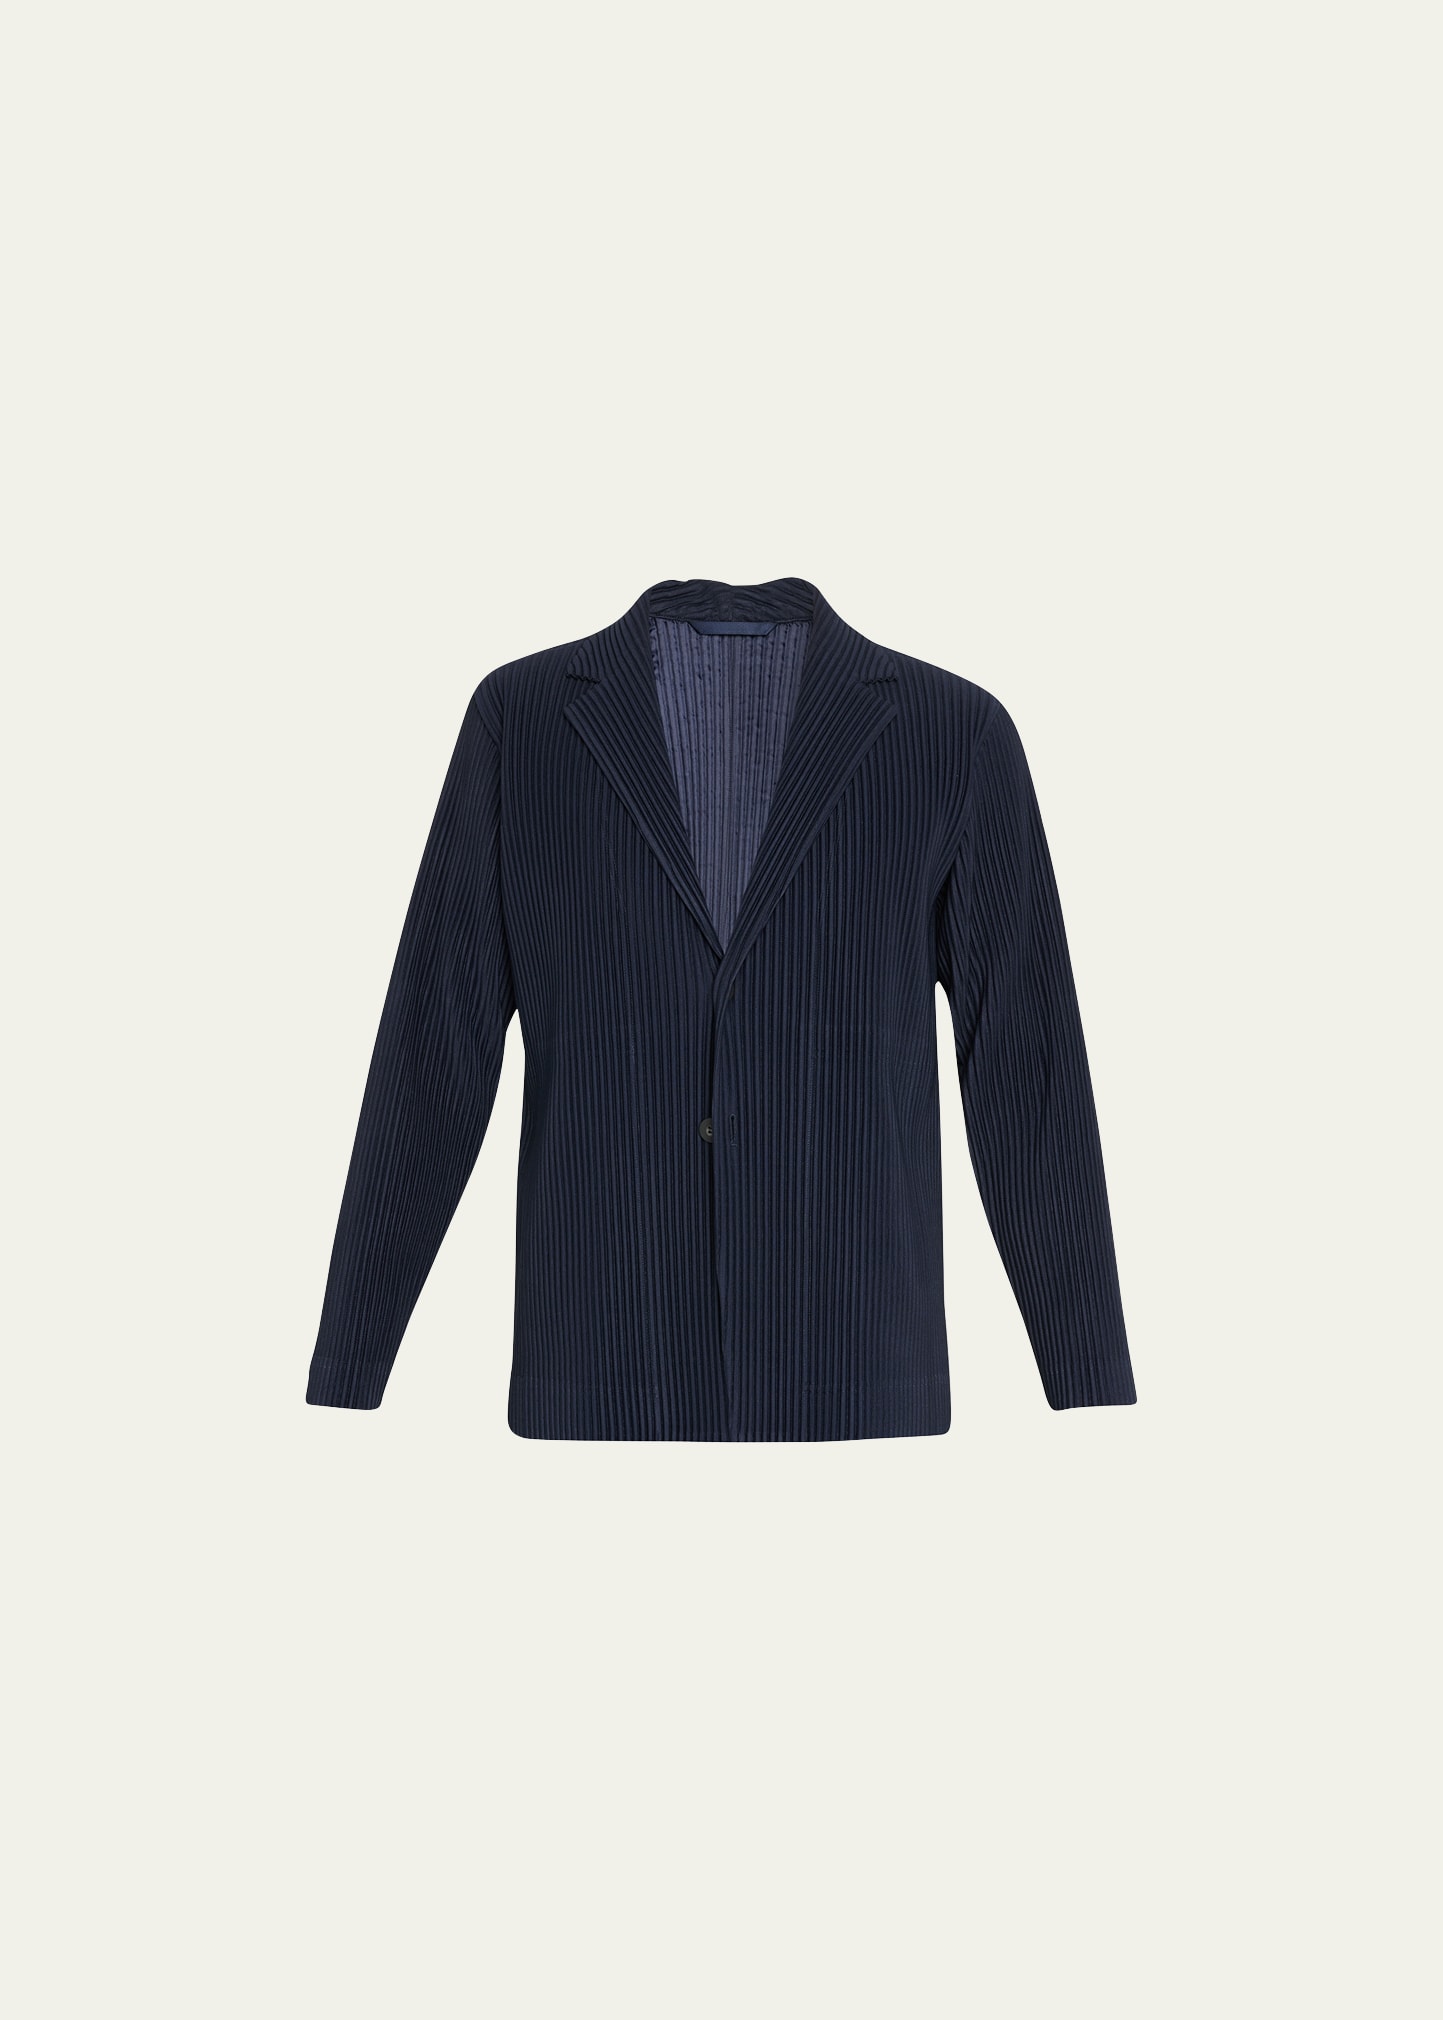 Issey Miyake Men's Pleated Polyester Sport Coat In Navy